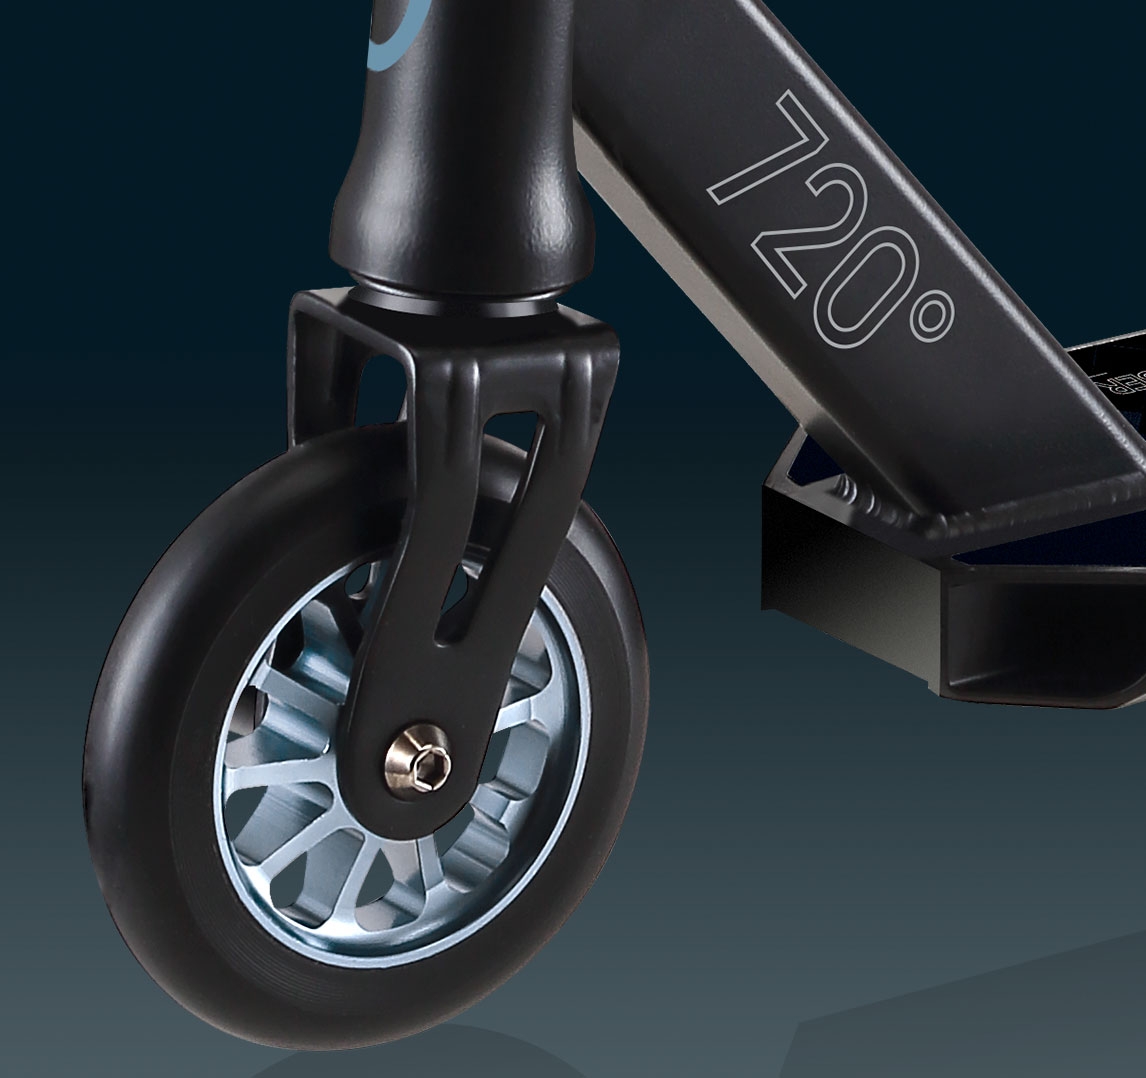 GS trick scooters are equipped with a threaded fork and headset best for beginner freestyle scootering